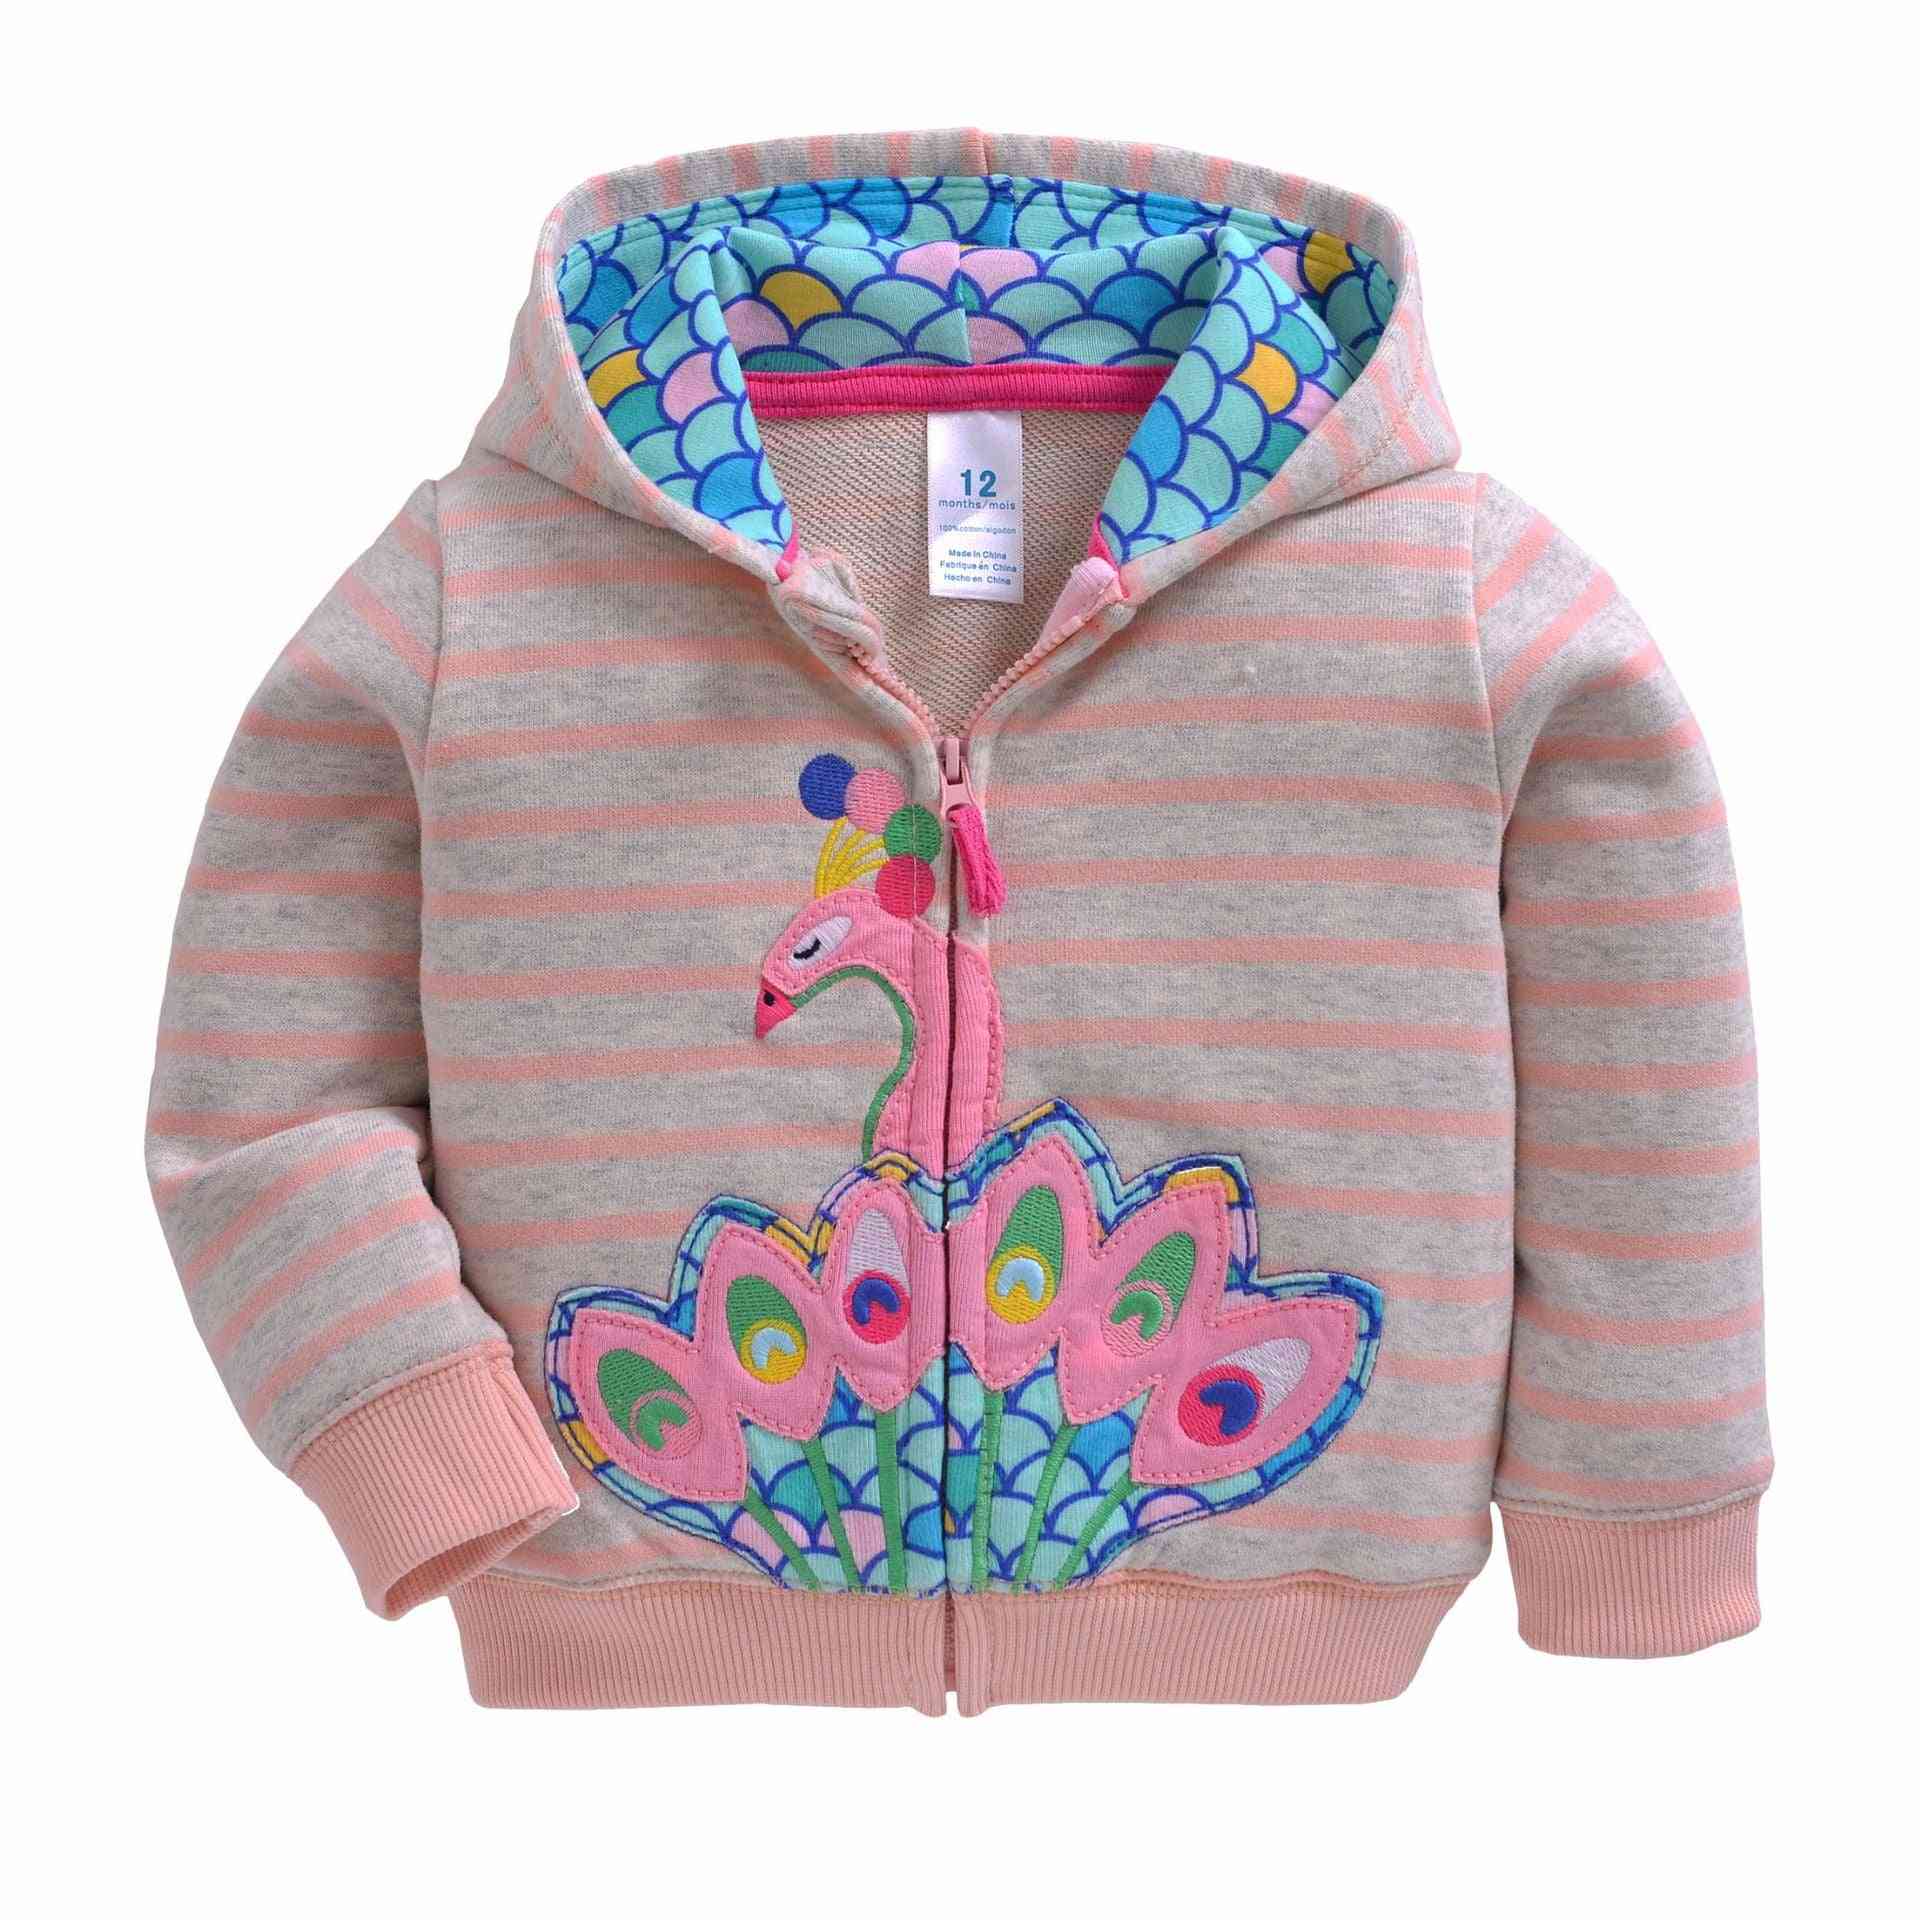 Baby Hooded Sweatshirts Outwear Kids Clothes For Boy, Girl